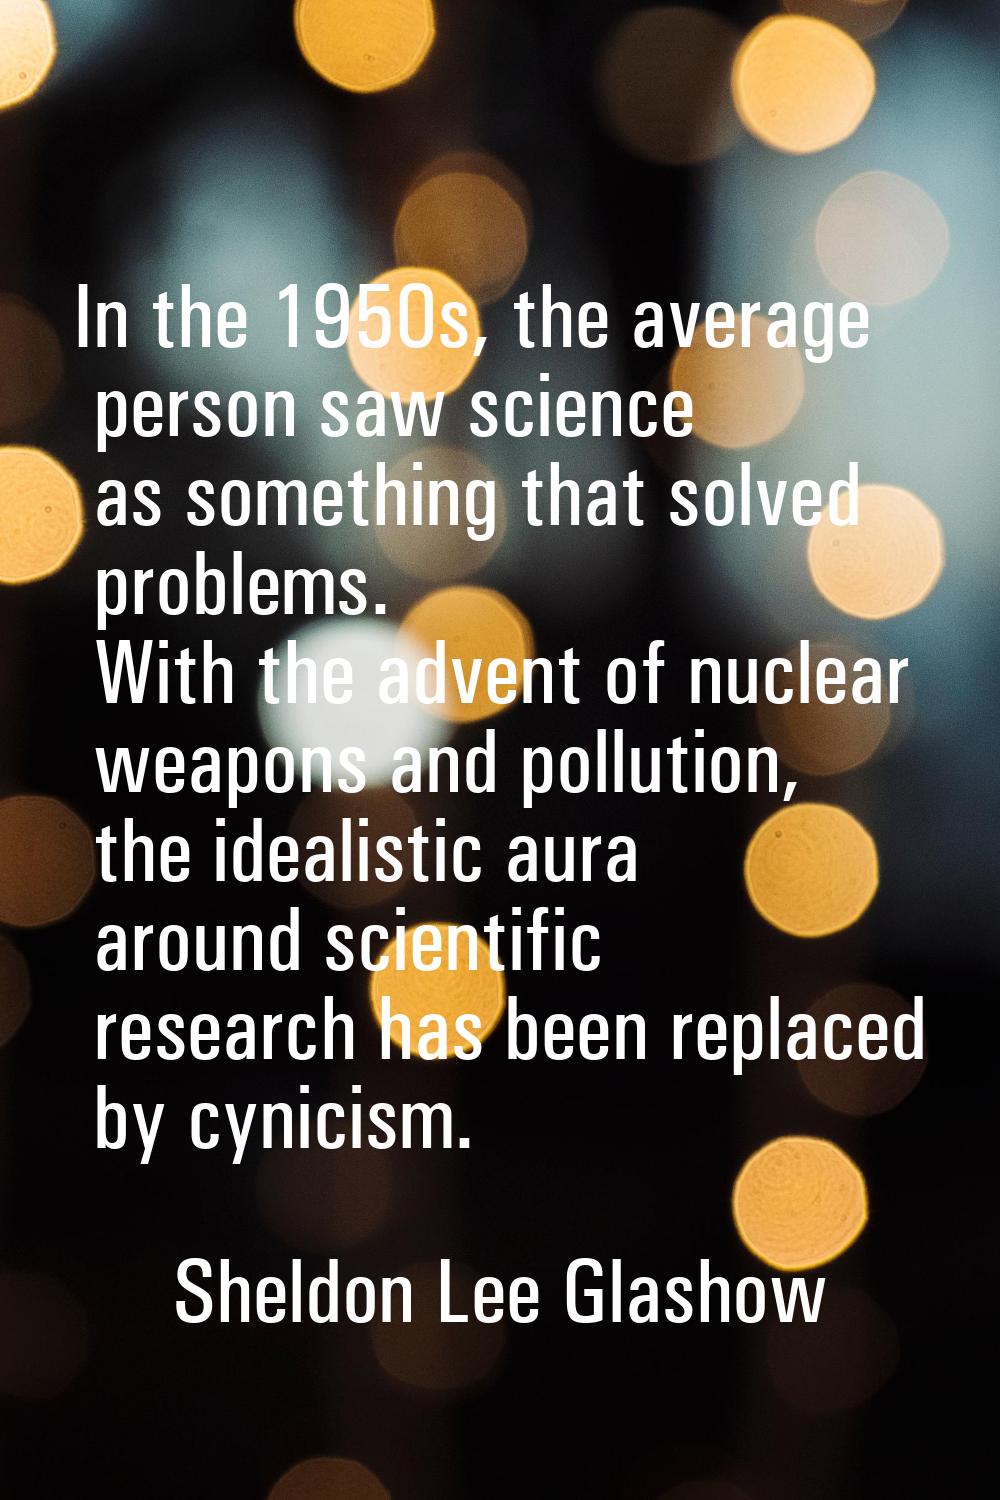 In the 1950s, the average person saw science as something that solved problems. With the advent of 